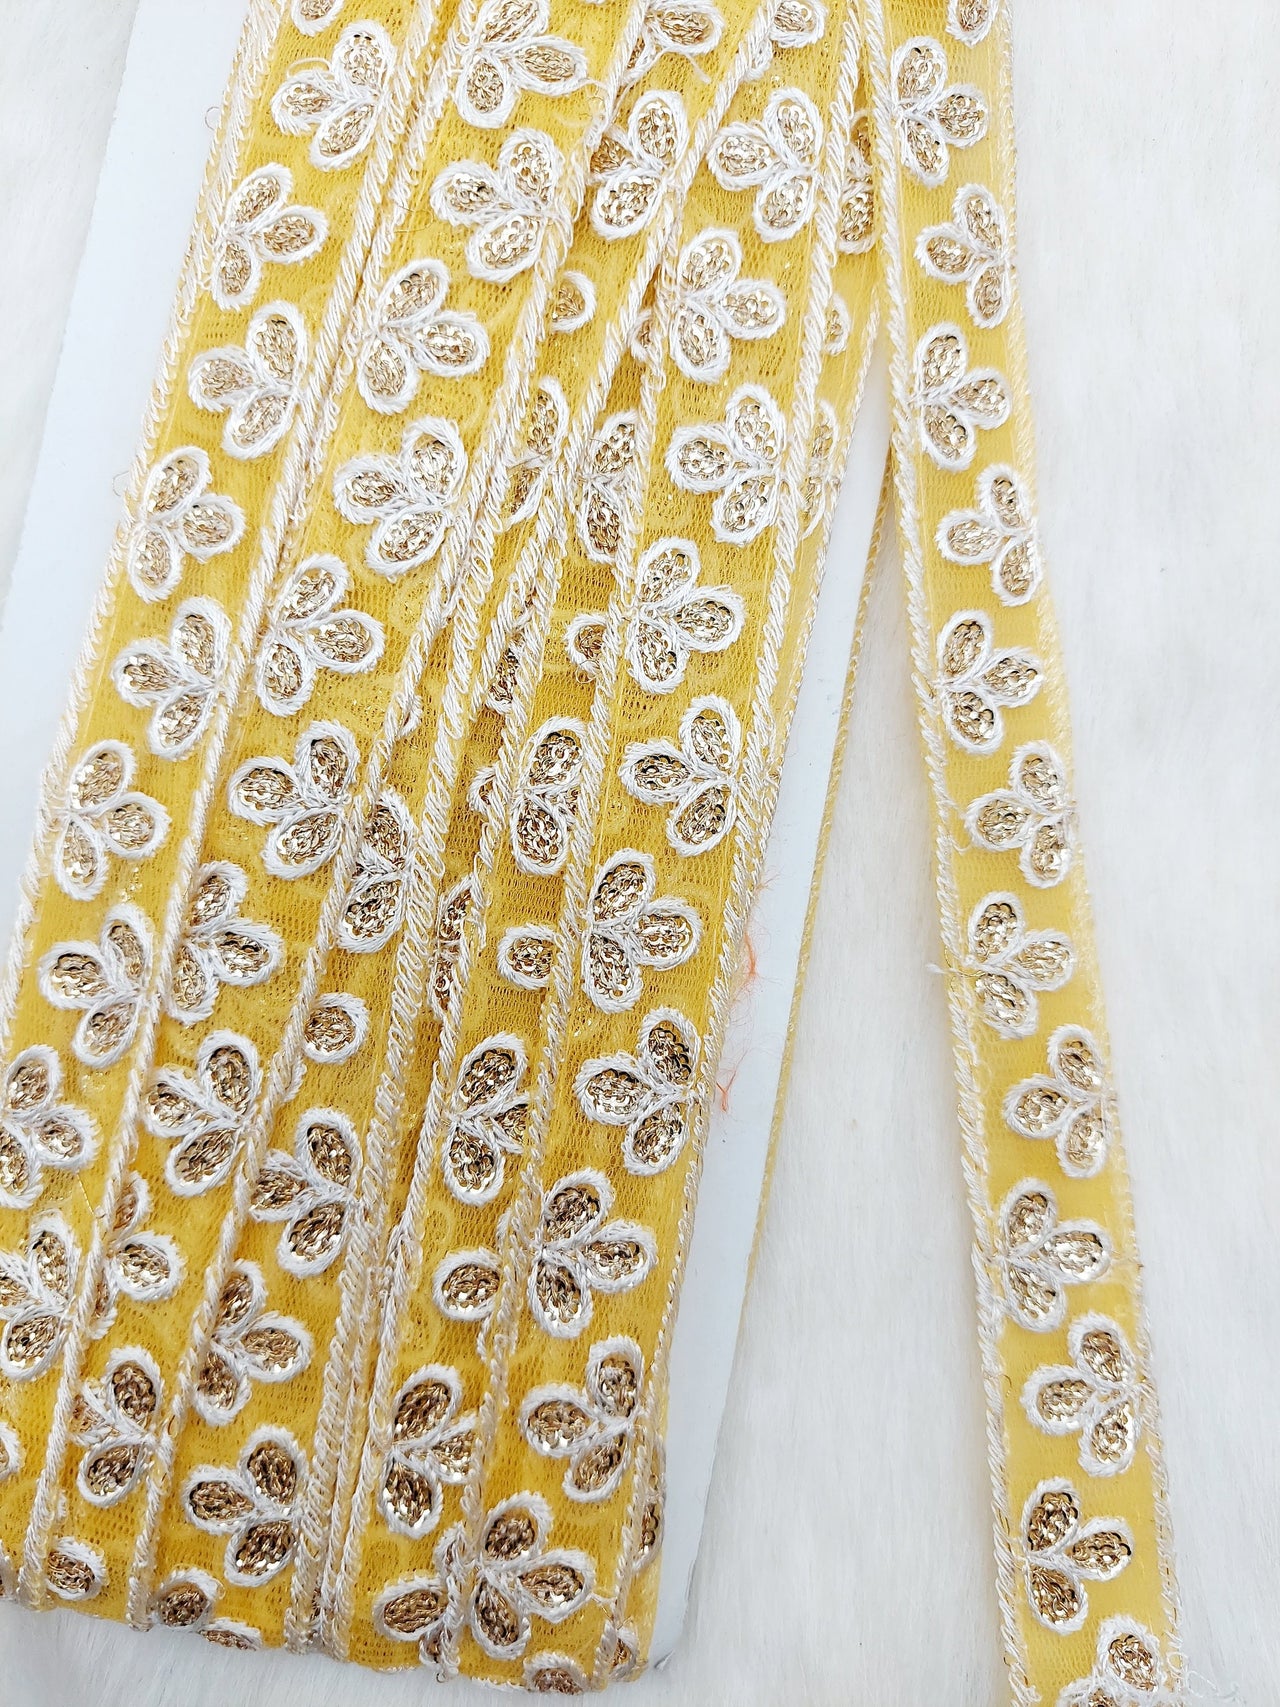 Wholesale Yellow Net Lace Floral Embroidery & Glitter Gold Sequins, Indian Wedding Border, Gifting Ribbon Costume Trim Fashion Trimming